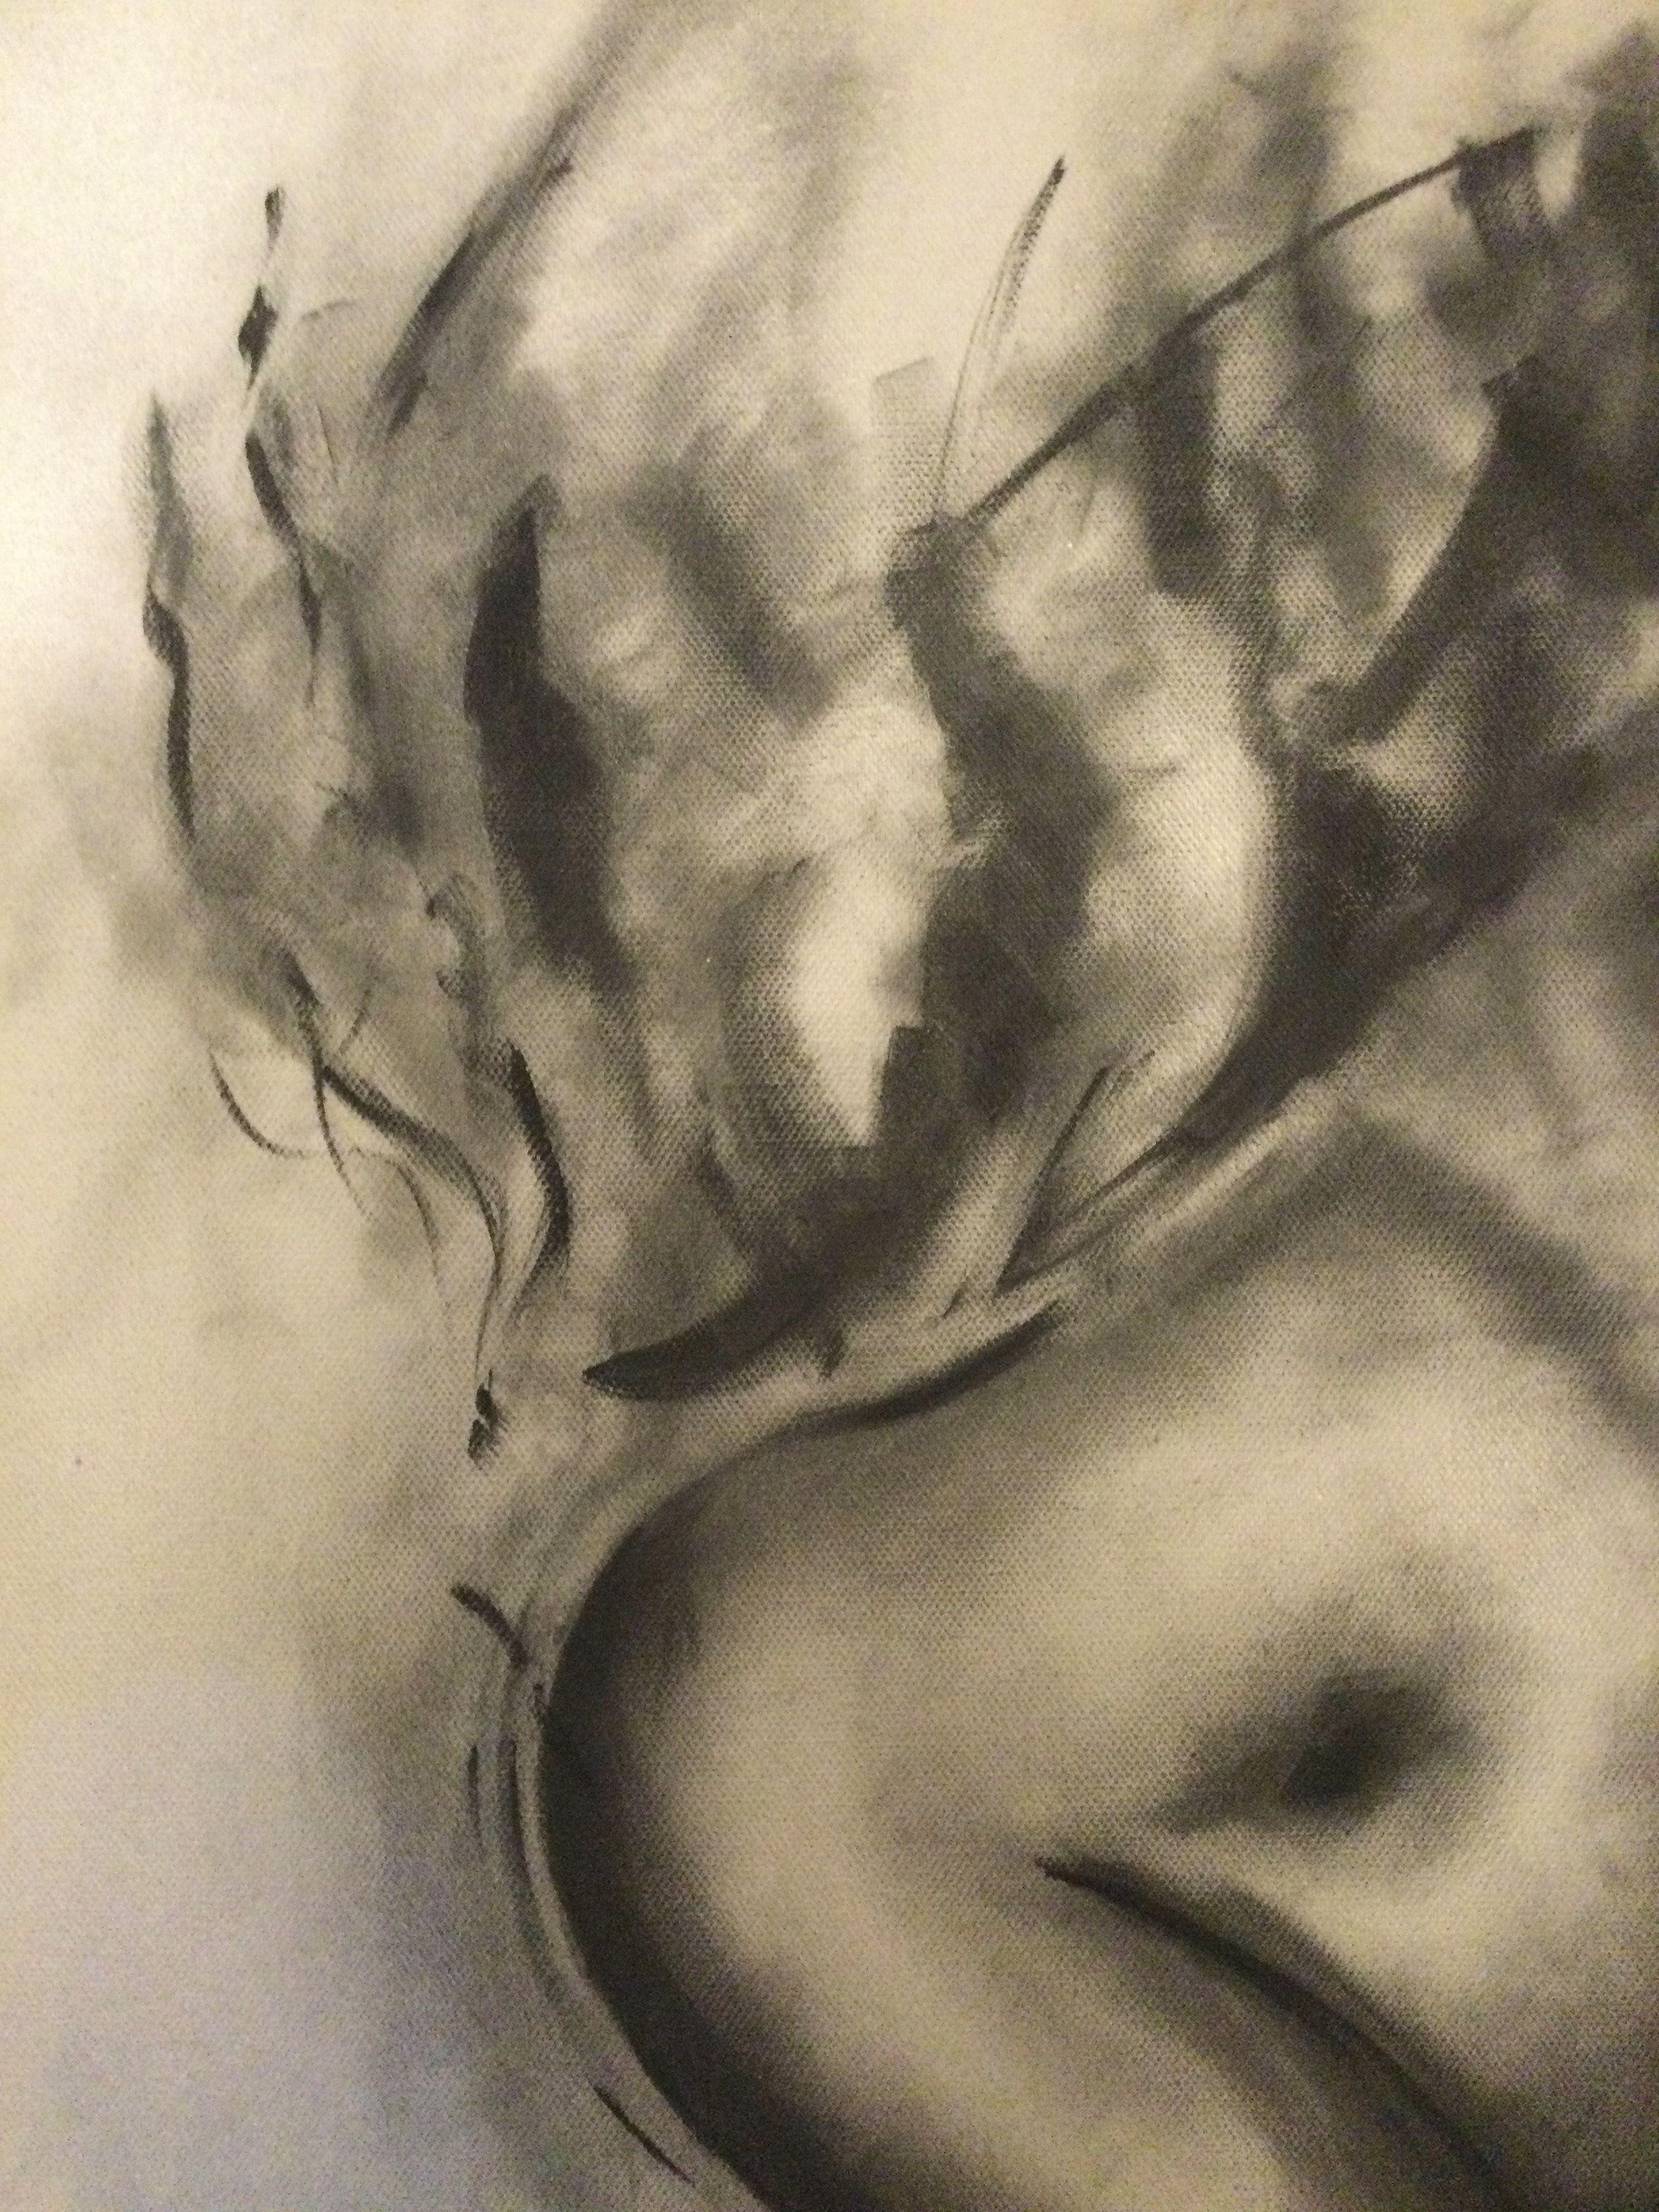 how to draw with charcoal on canvas